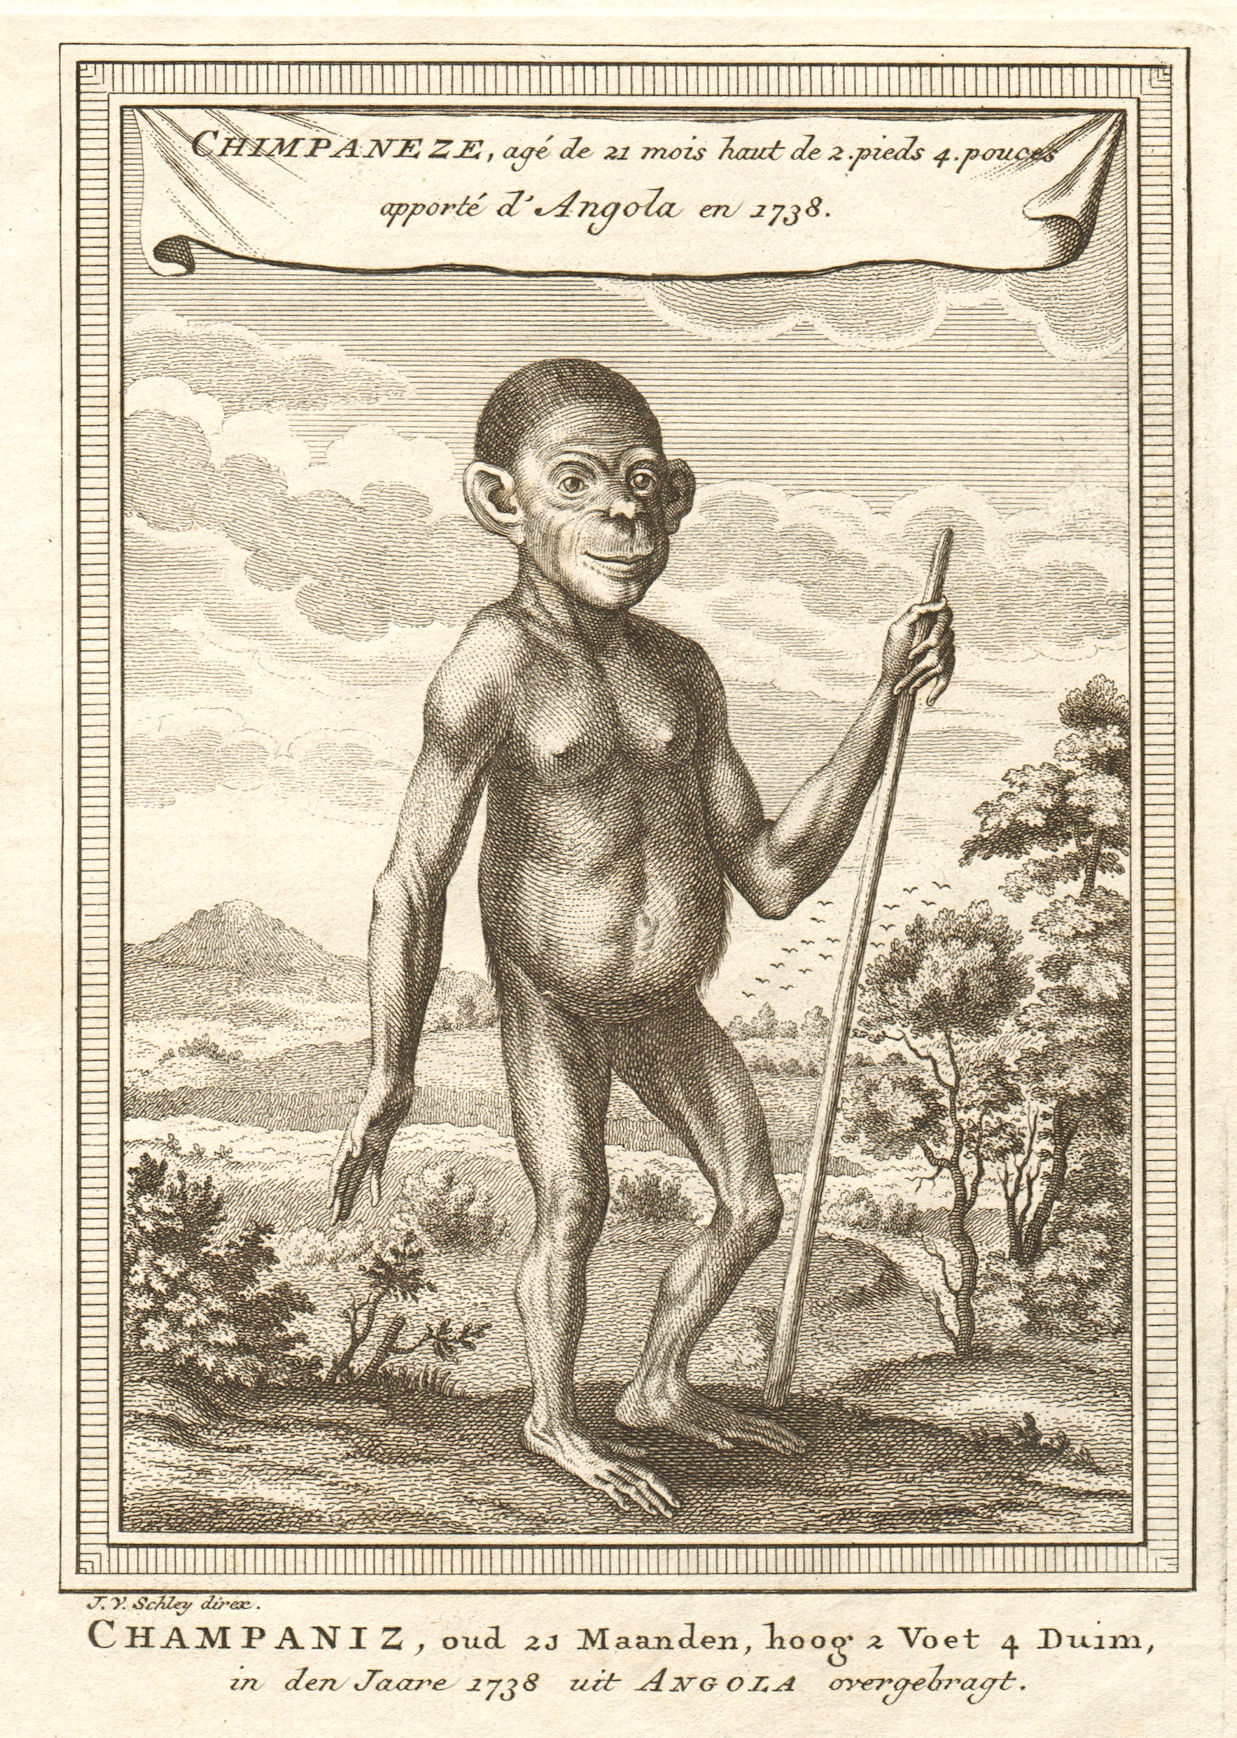 Associate Product Chimpaneze, 21 months old, brought from Angola in 1738. SCHLEY 1748 print